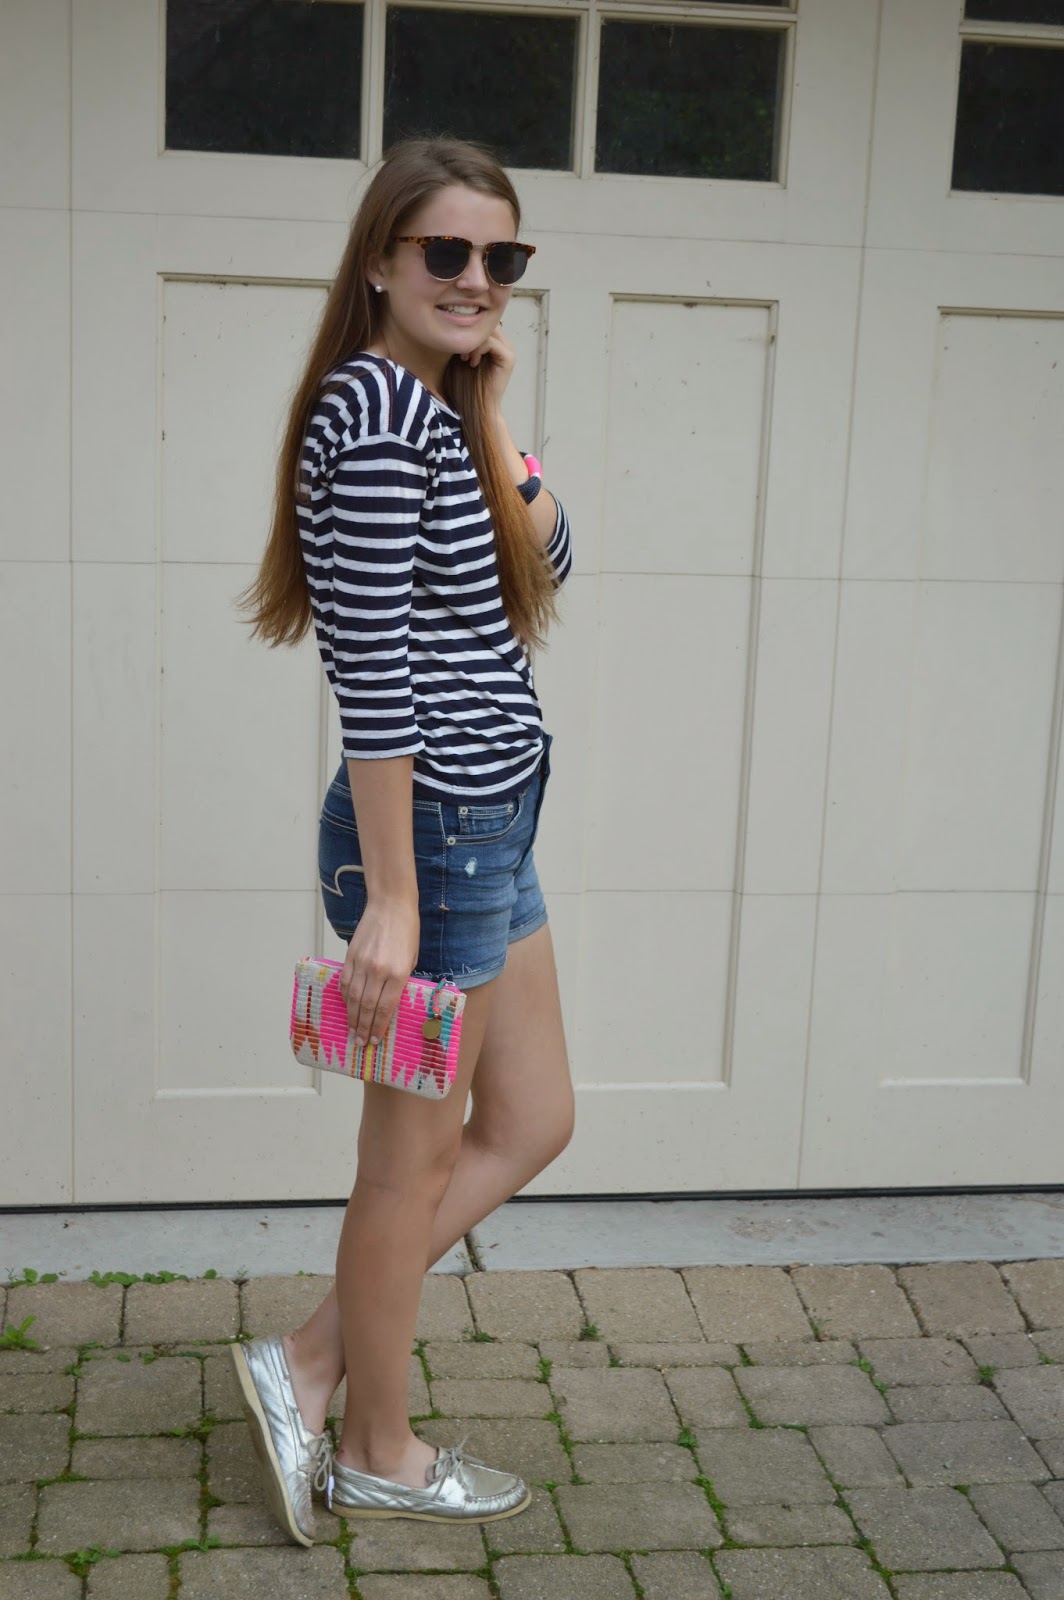 citrus and style: Outfit: Stripes with a Pop of Color